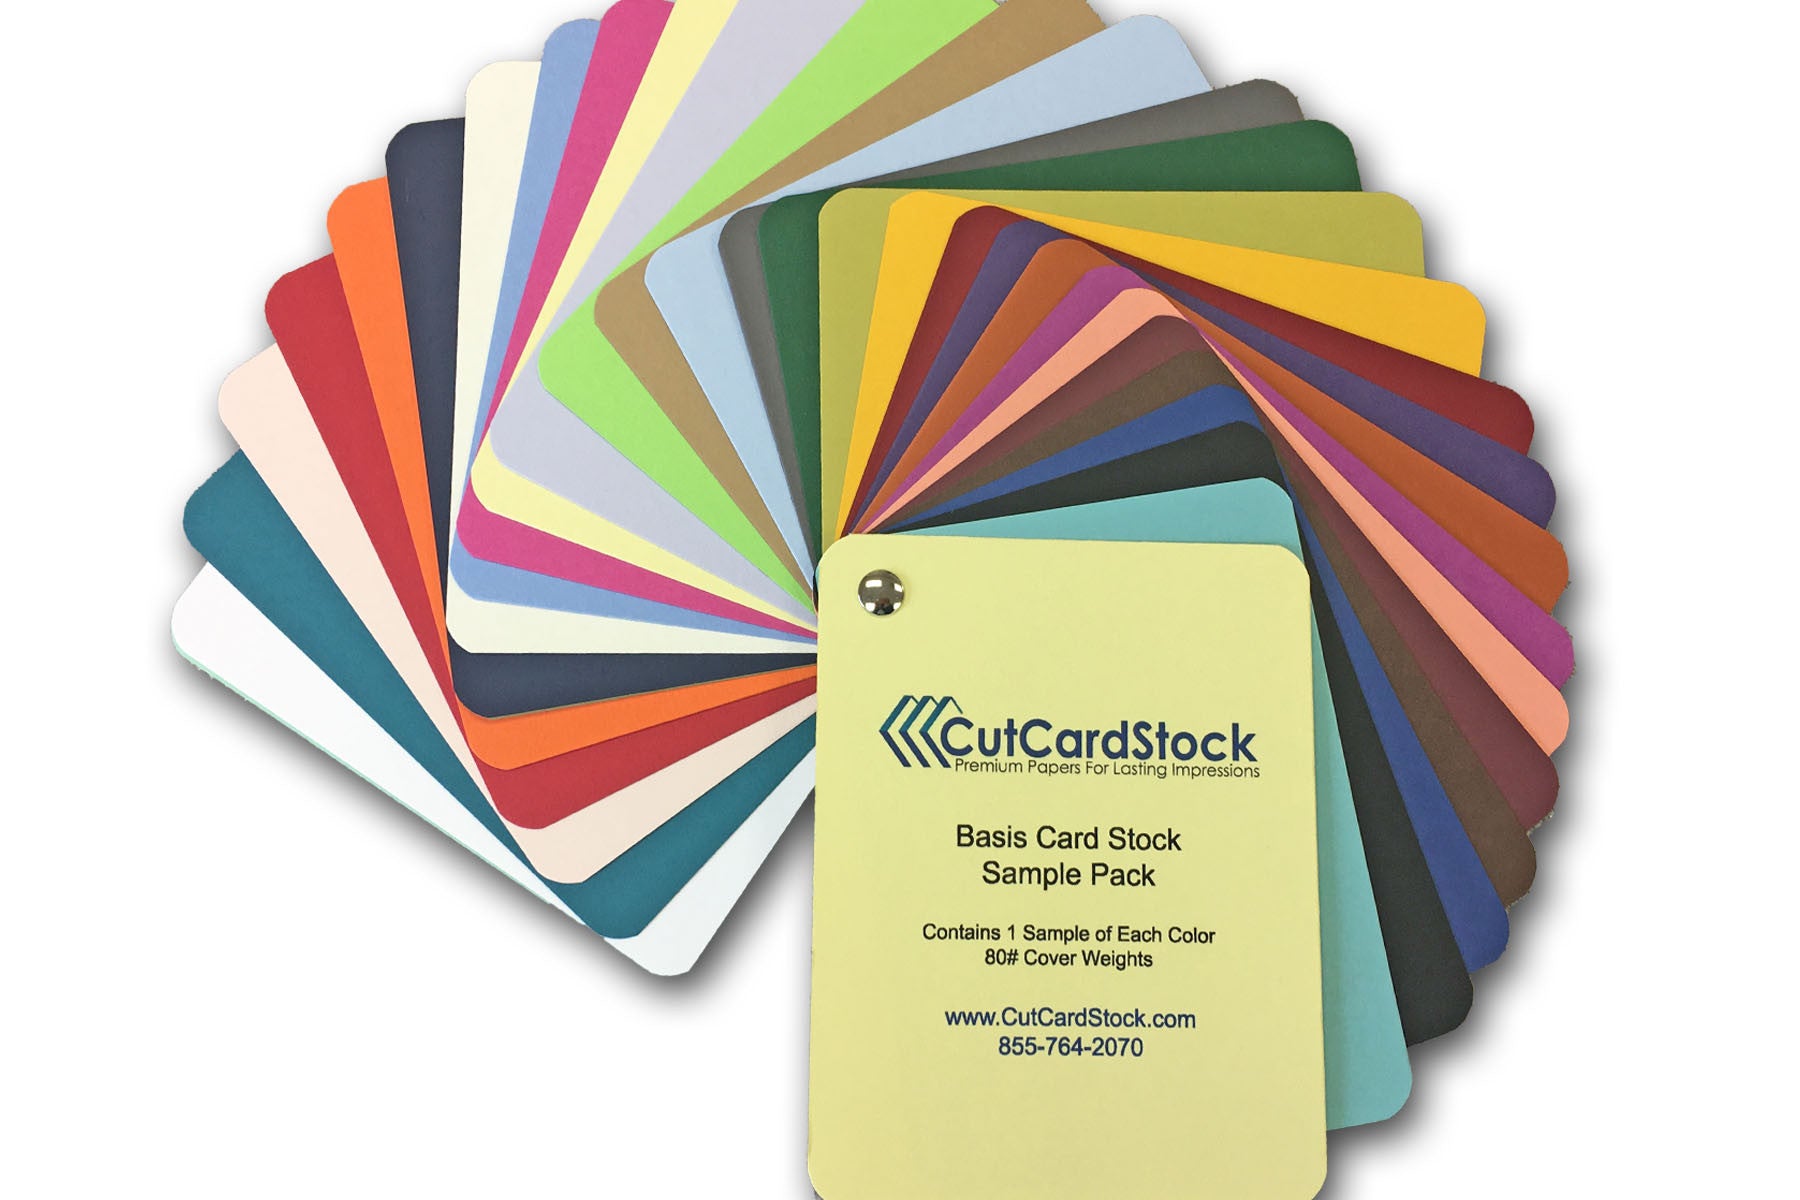 Ampad Primary Cardstock 8.5 x 11 50 Sheets Red Blue Green Yellow 65 lb  -New